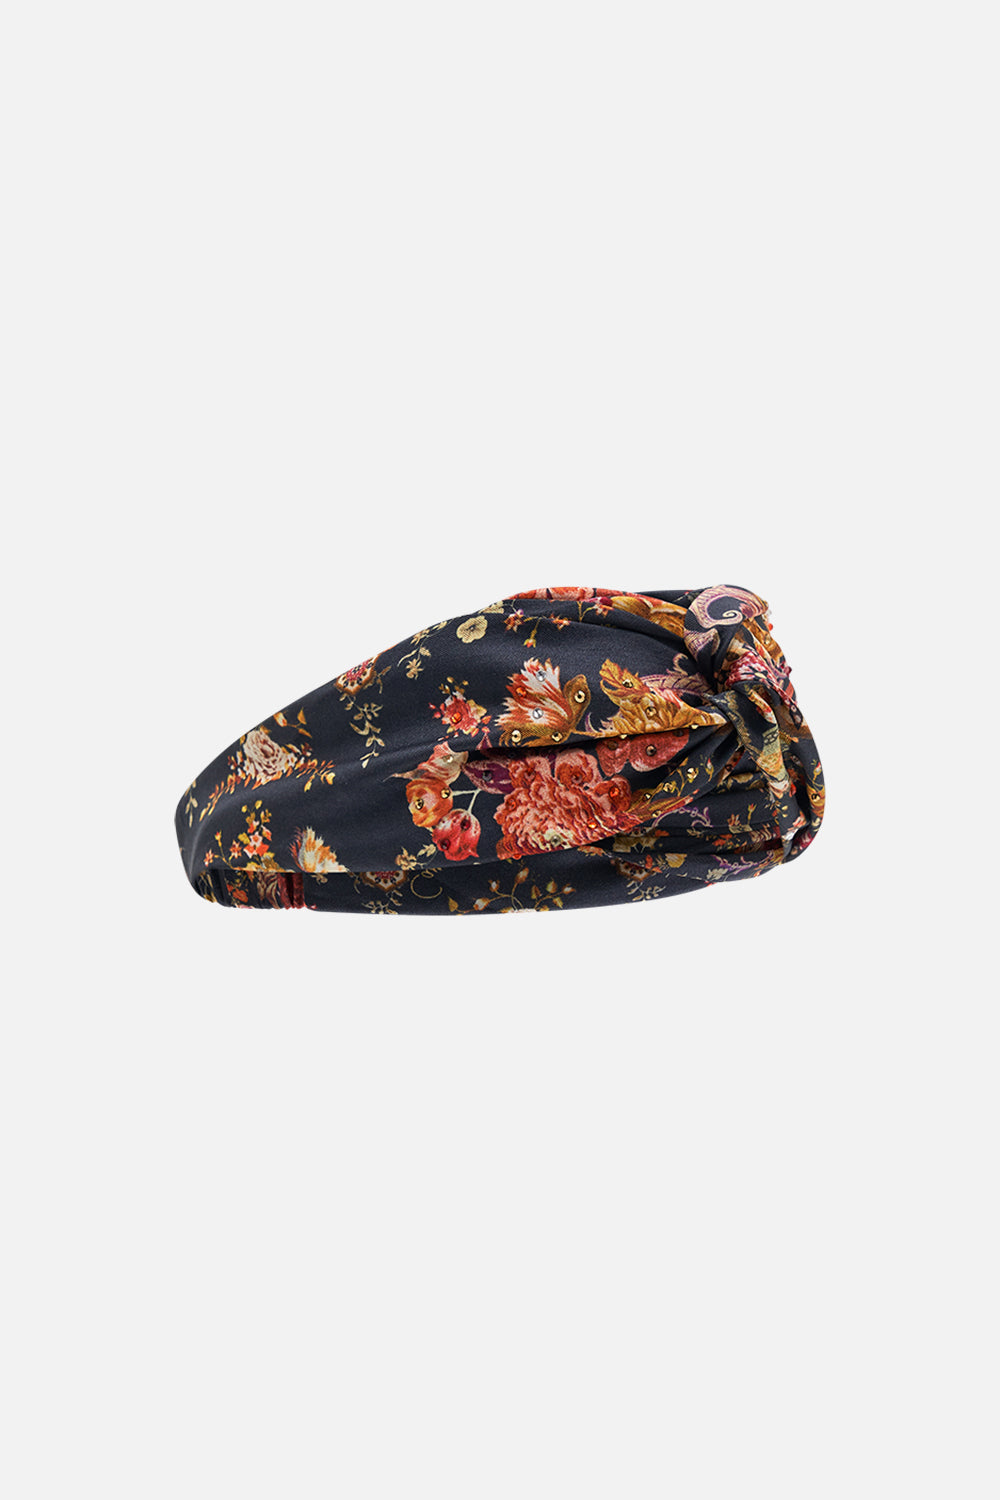 CAMILLA Floral Woven Twist Headband in Stitched in Time print